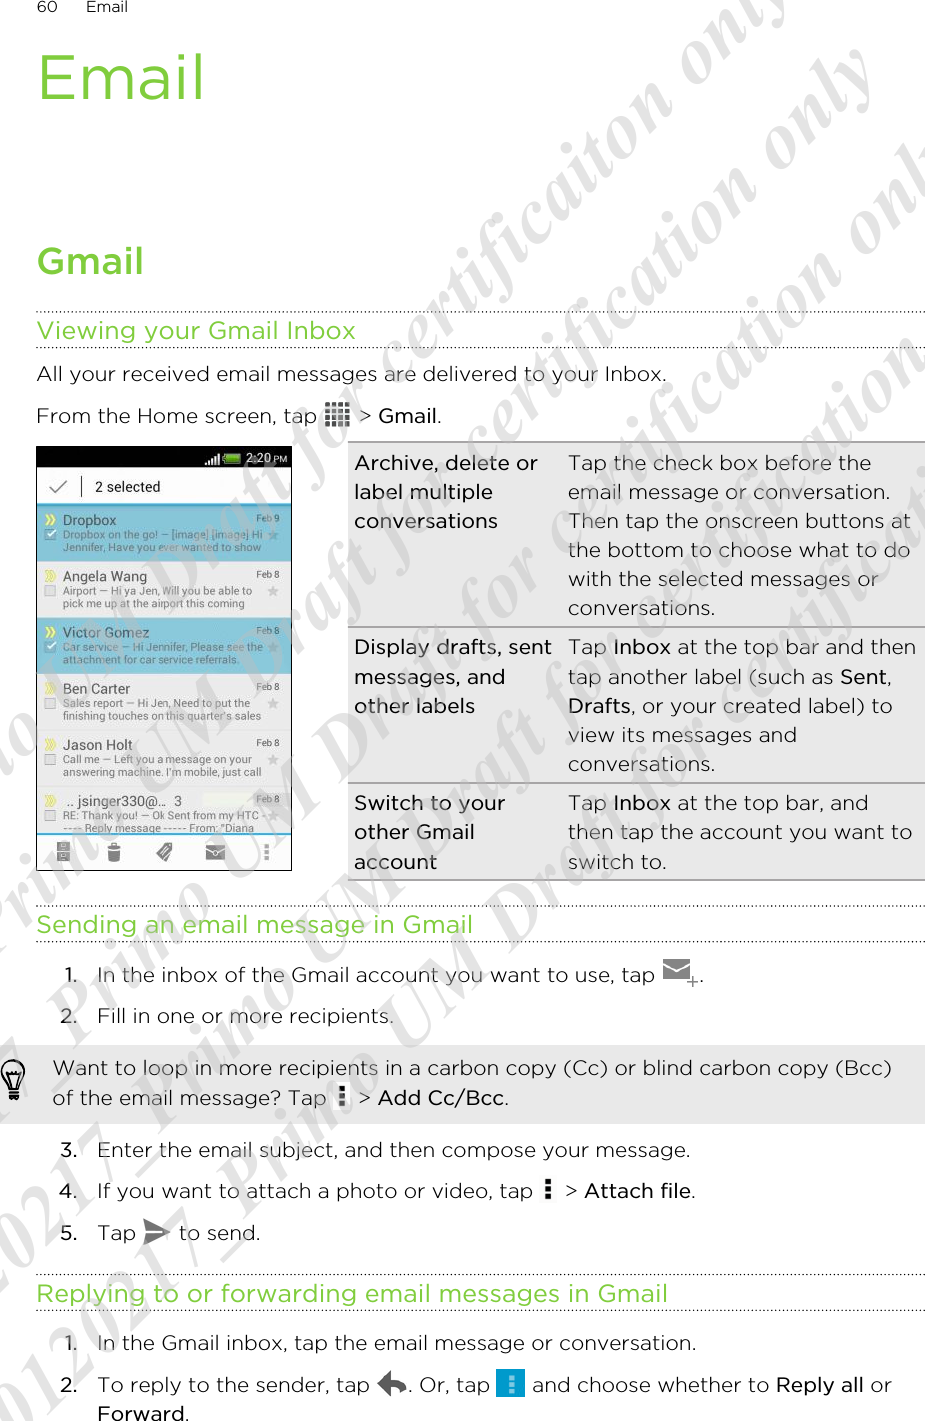 EmailGmailViewing your Gmail InboxAll your received email messages are delivered to your Inbox.From the Home screen, tap   &gt; Gmail. Archive, delete orlabel multipleconversationsTap the check box before theemail message or conversation.Then tap the onscreen buttons atthe bottom to choose what to dowith the selected messages orconversations.Display drafts, sentmessages, andother labelsTap Inbox at the top bar and thentap another label (such as Sent,Drafts, or your created label) toview its messages andconversations.Switch to yourother GmailaccountTap Inbox at the top bar, andthen tap the account you want toswitch to.Sending an email message in Gmail1. In the inbox of the Gmail account you want to use, tap  .2. Fill in one or more recipients. Want to loop in more recipients in a carbon copy (Cc) or blind carbon copy (Bcc)of the email message? Tap   &gt; Add Cc/Bcc.3. Enter the email subject, and then compose your message.4. If you want to attach a photo or video, tap   &gt; Attach file.5. Tap   to send.Replying to or forwarding email messages in Gmail1. In the Gmail inbox, tap the email message or conversation.2. To reply to the sender, tap  . Or, tap   and choose whether to Reply all orForward.60 Email20120217_Primo UM Draft for certificaiton only 20120217_Primo UM Draft for certification only 20120217_Primo UM Draft for certification only 20120217_Primo UM Draft for certification only 20120217_Primo UM Draft for certification only  